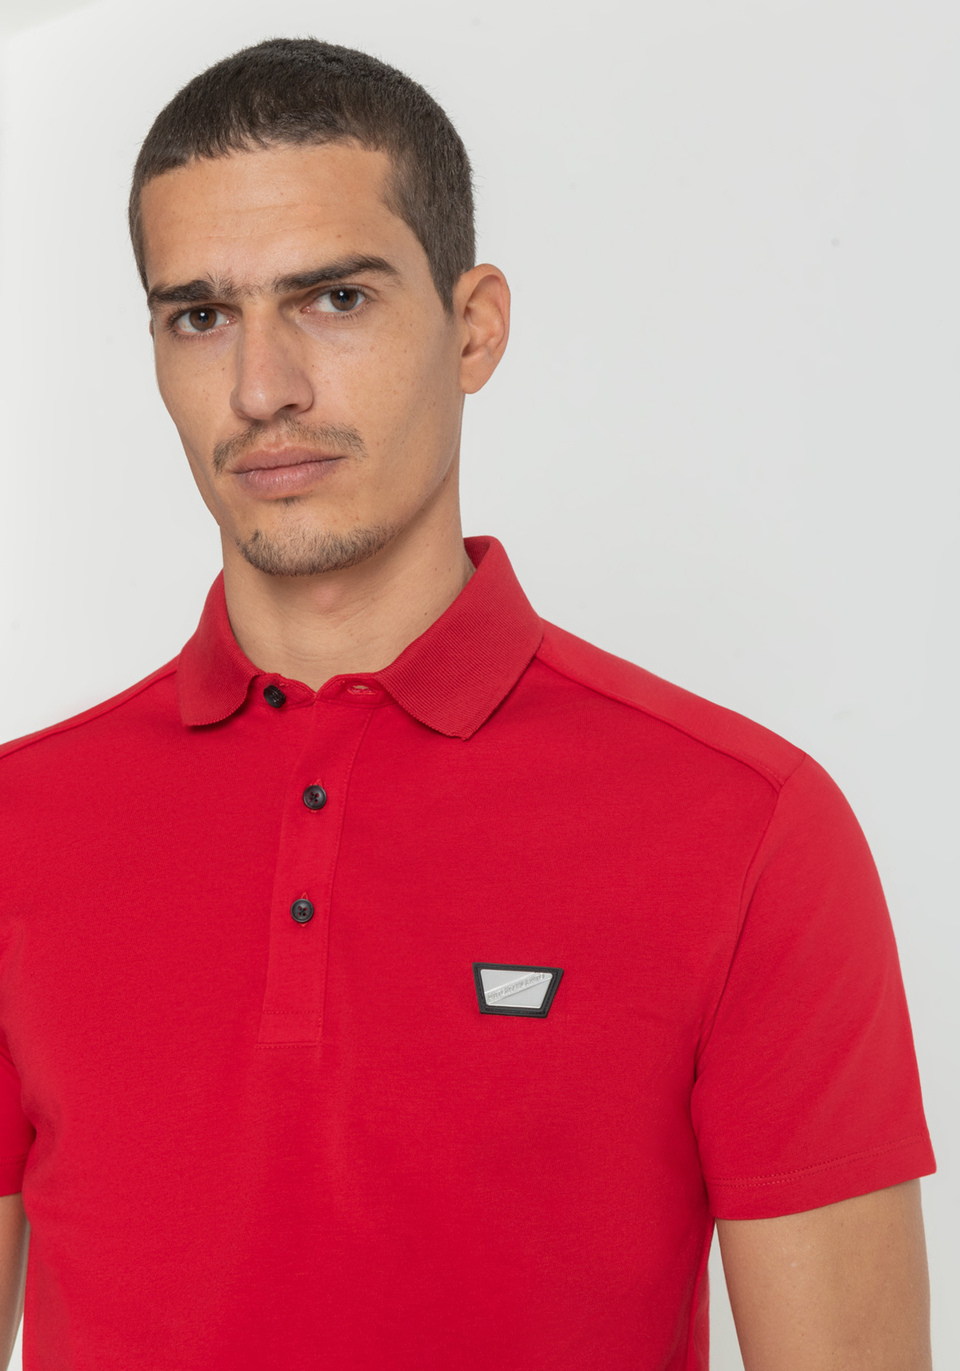 SUPER-SLIM-FIT POLO SHIRT IN SOFT STRETCHY COTTON - Antony Morato Online Shop